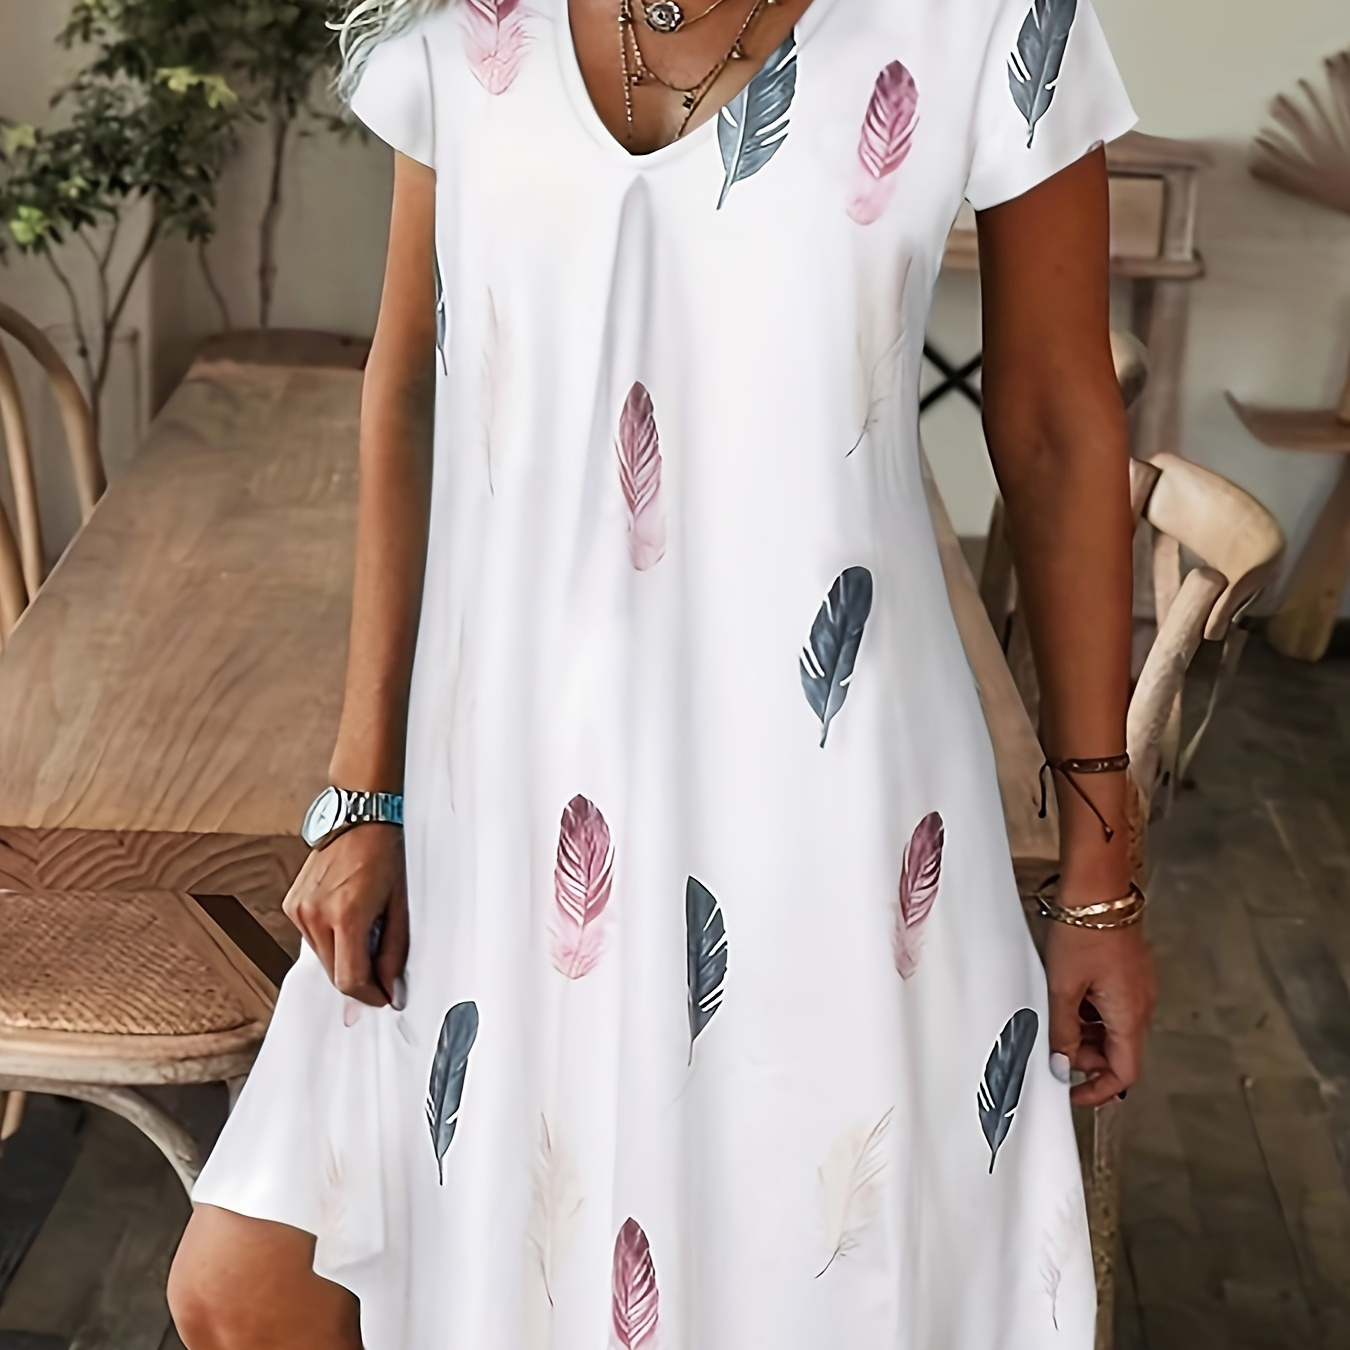 

Feather Print V-neck Dress, Casual A-line Short Sleeve Dress For Spring & Summer, Women's Clothing